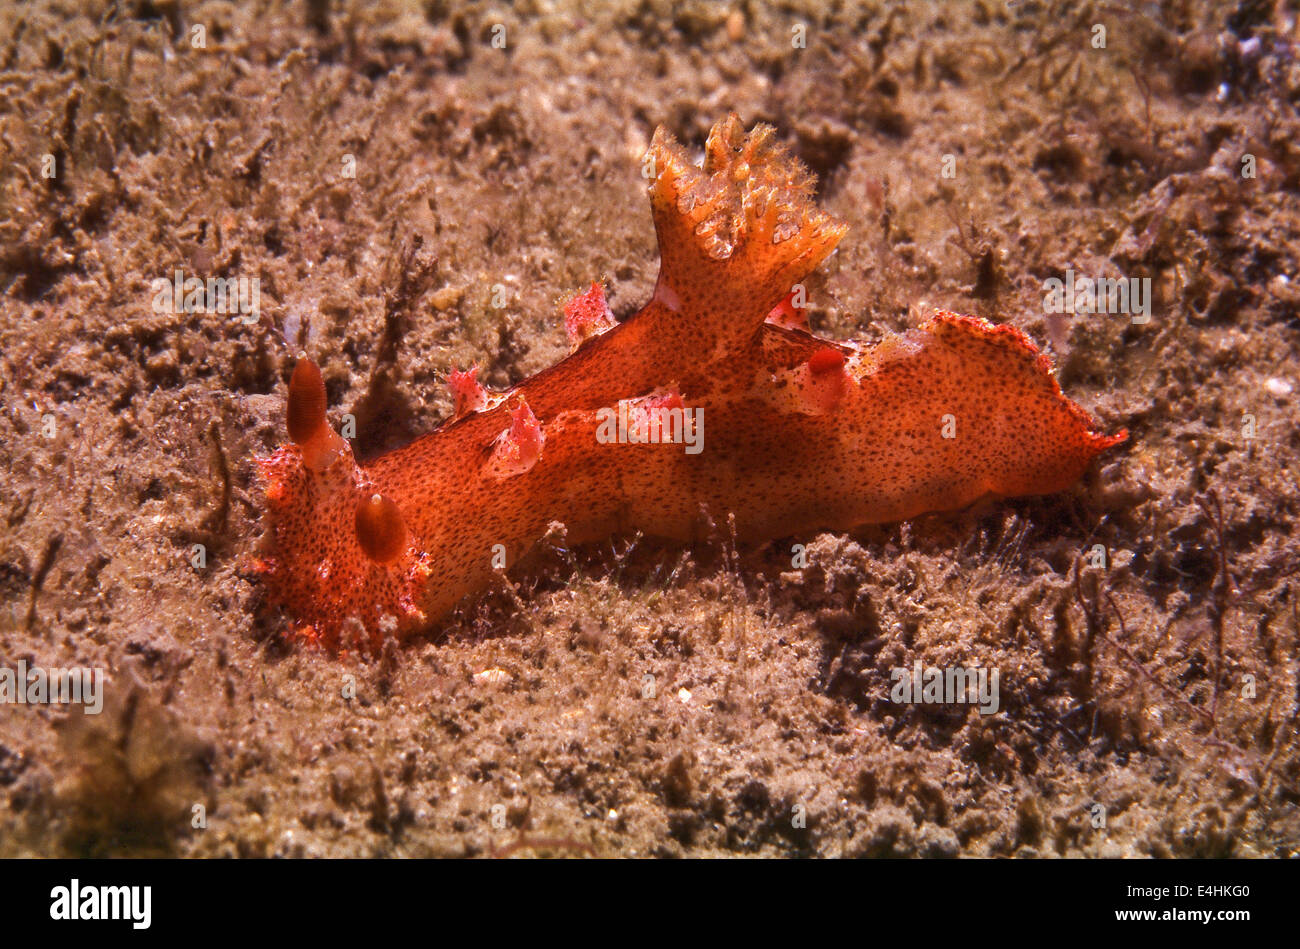 A nudibranch, Plocamopherus imperialis, at Camp Cove, Sydney Harbour, New South Wales, Australia Stock Photo